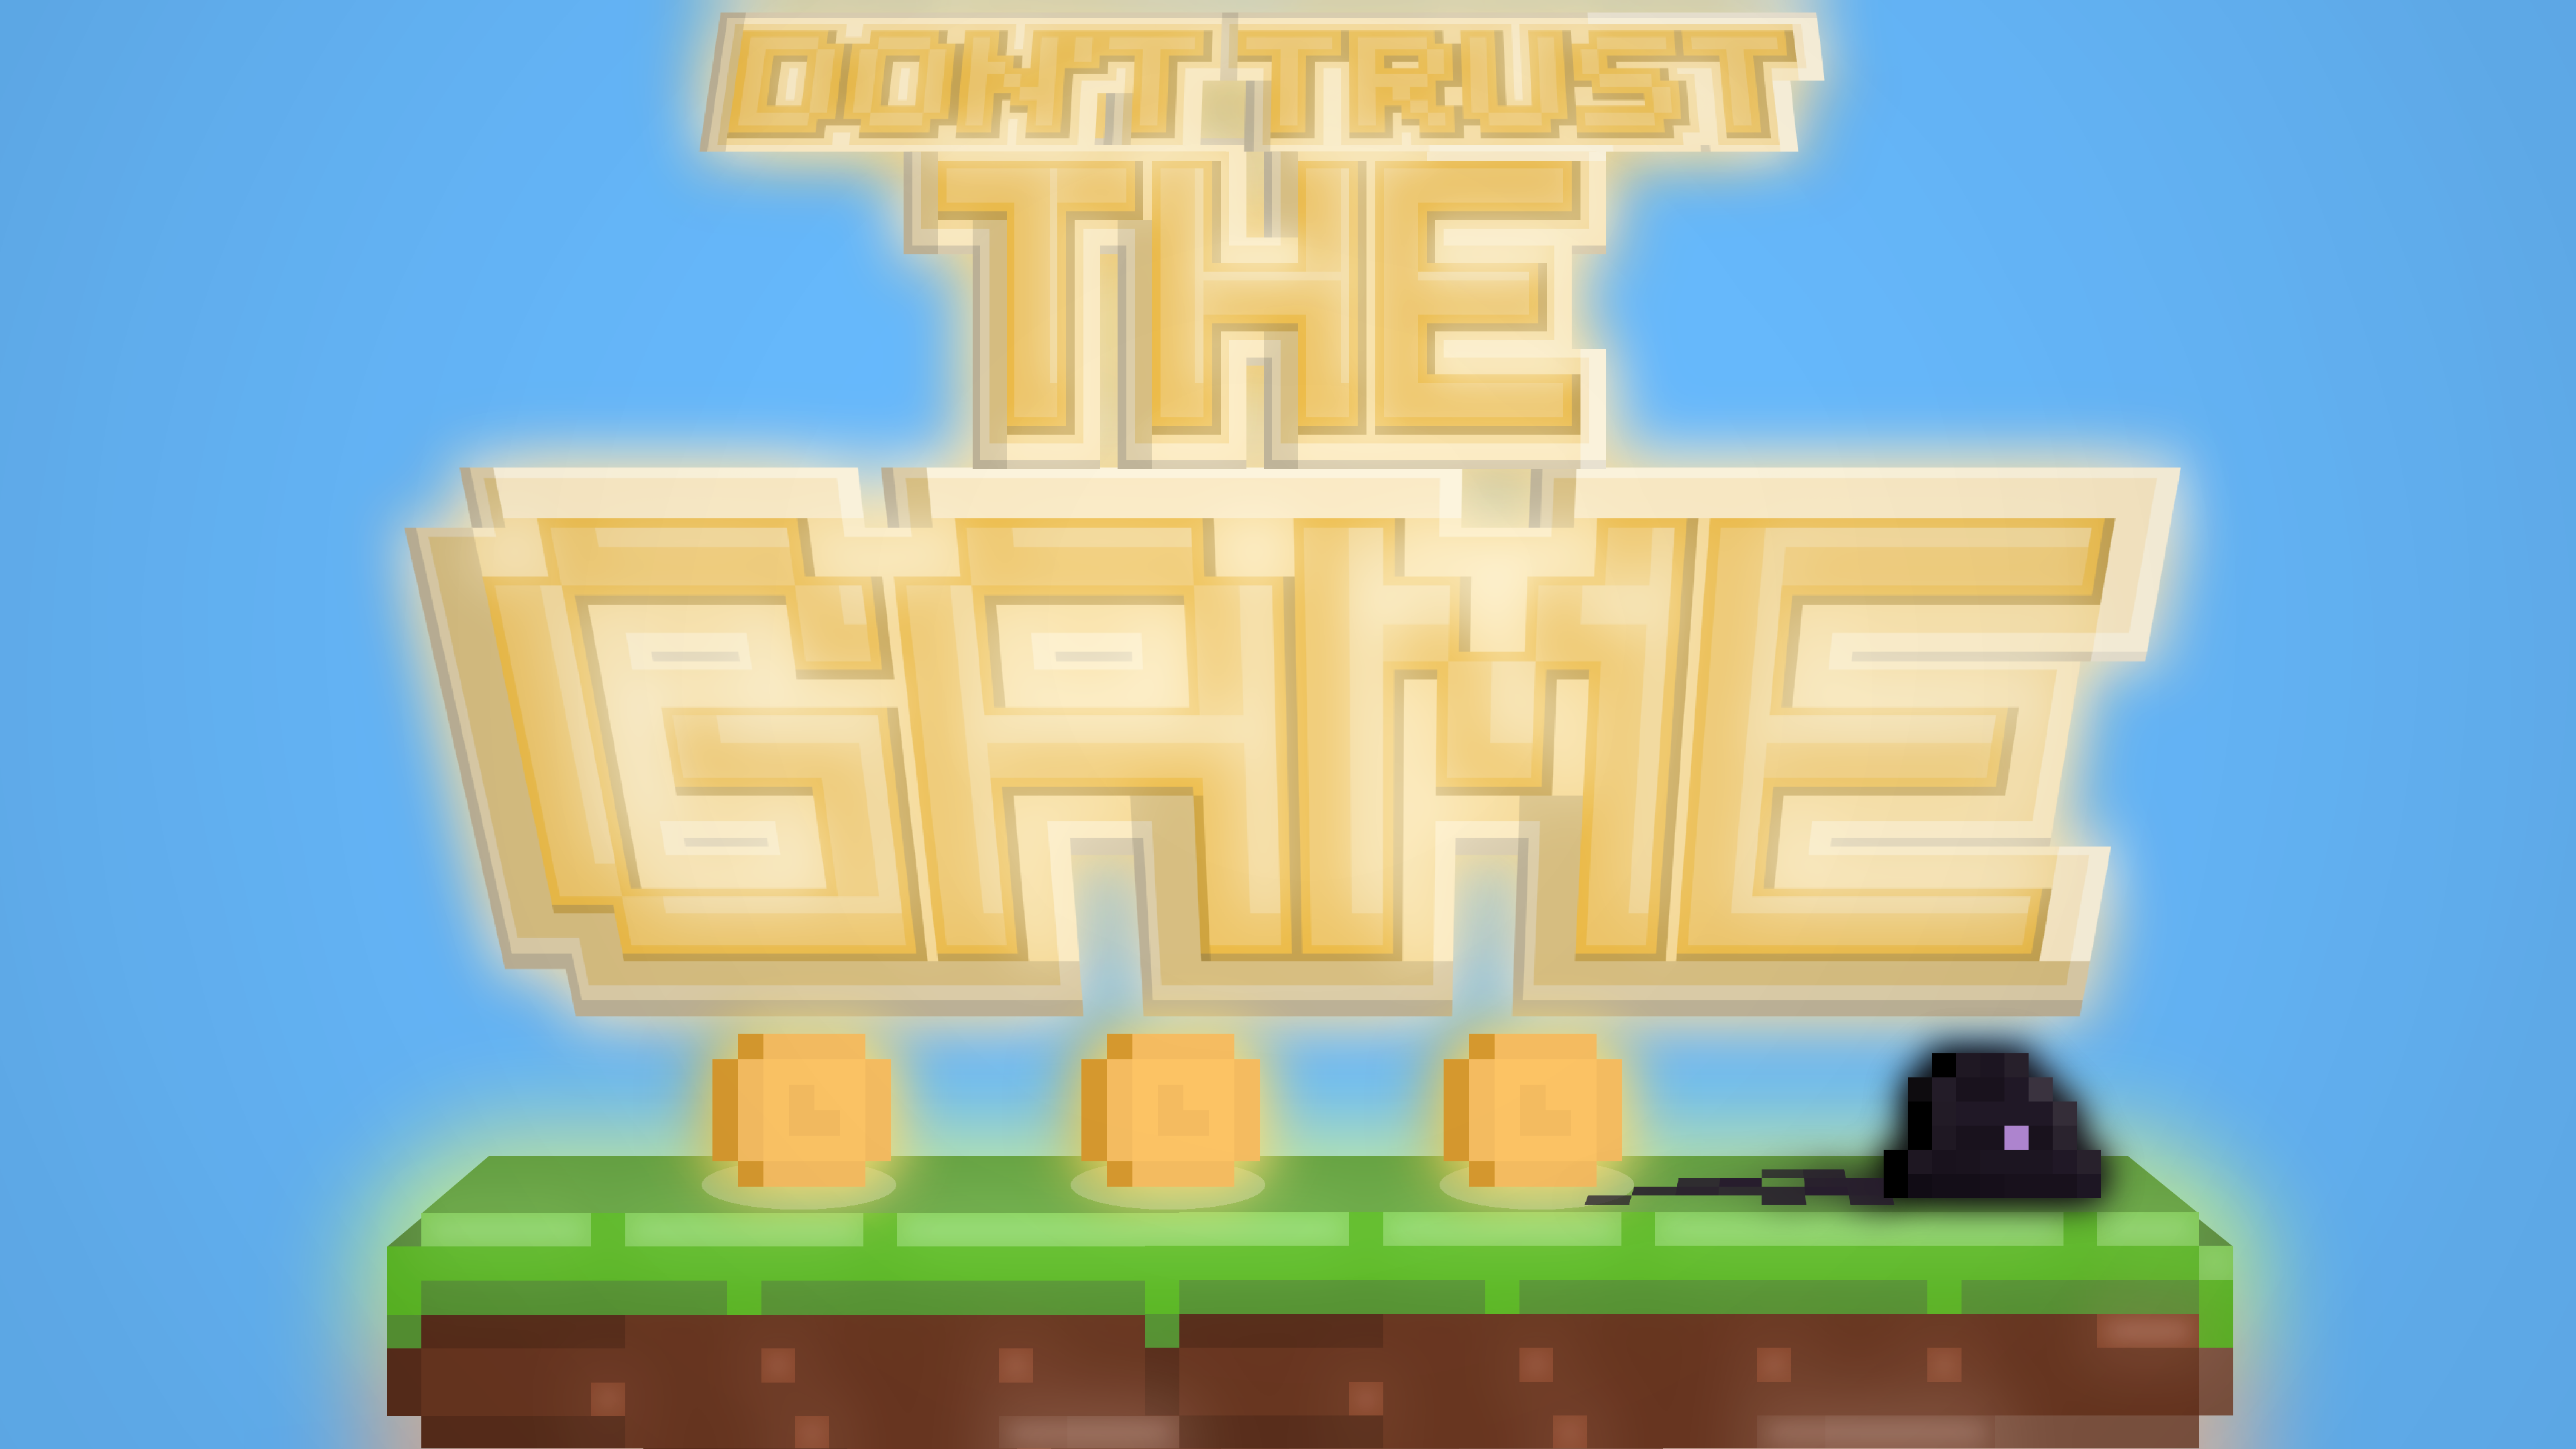 Don't trust the game